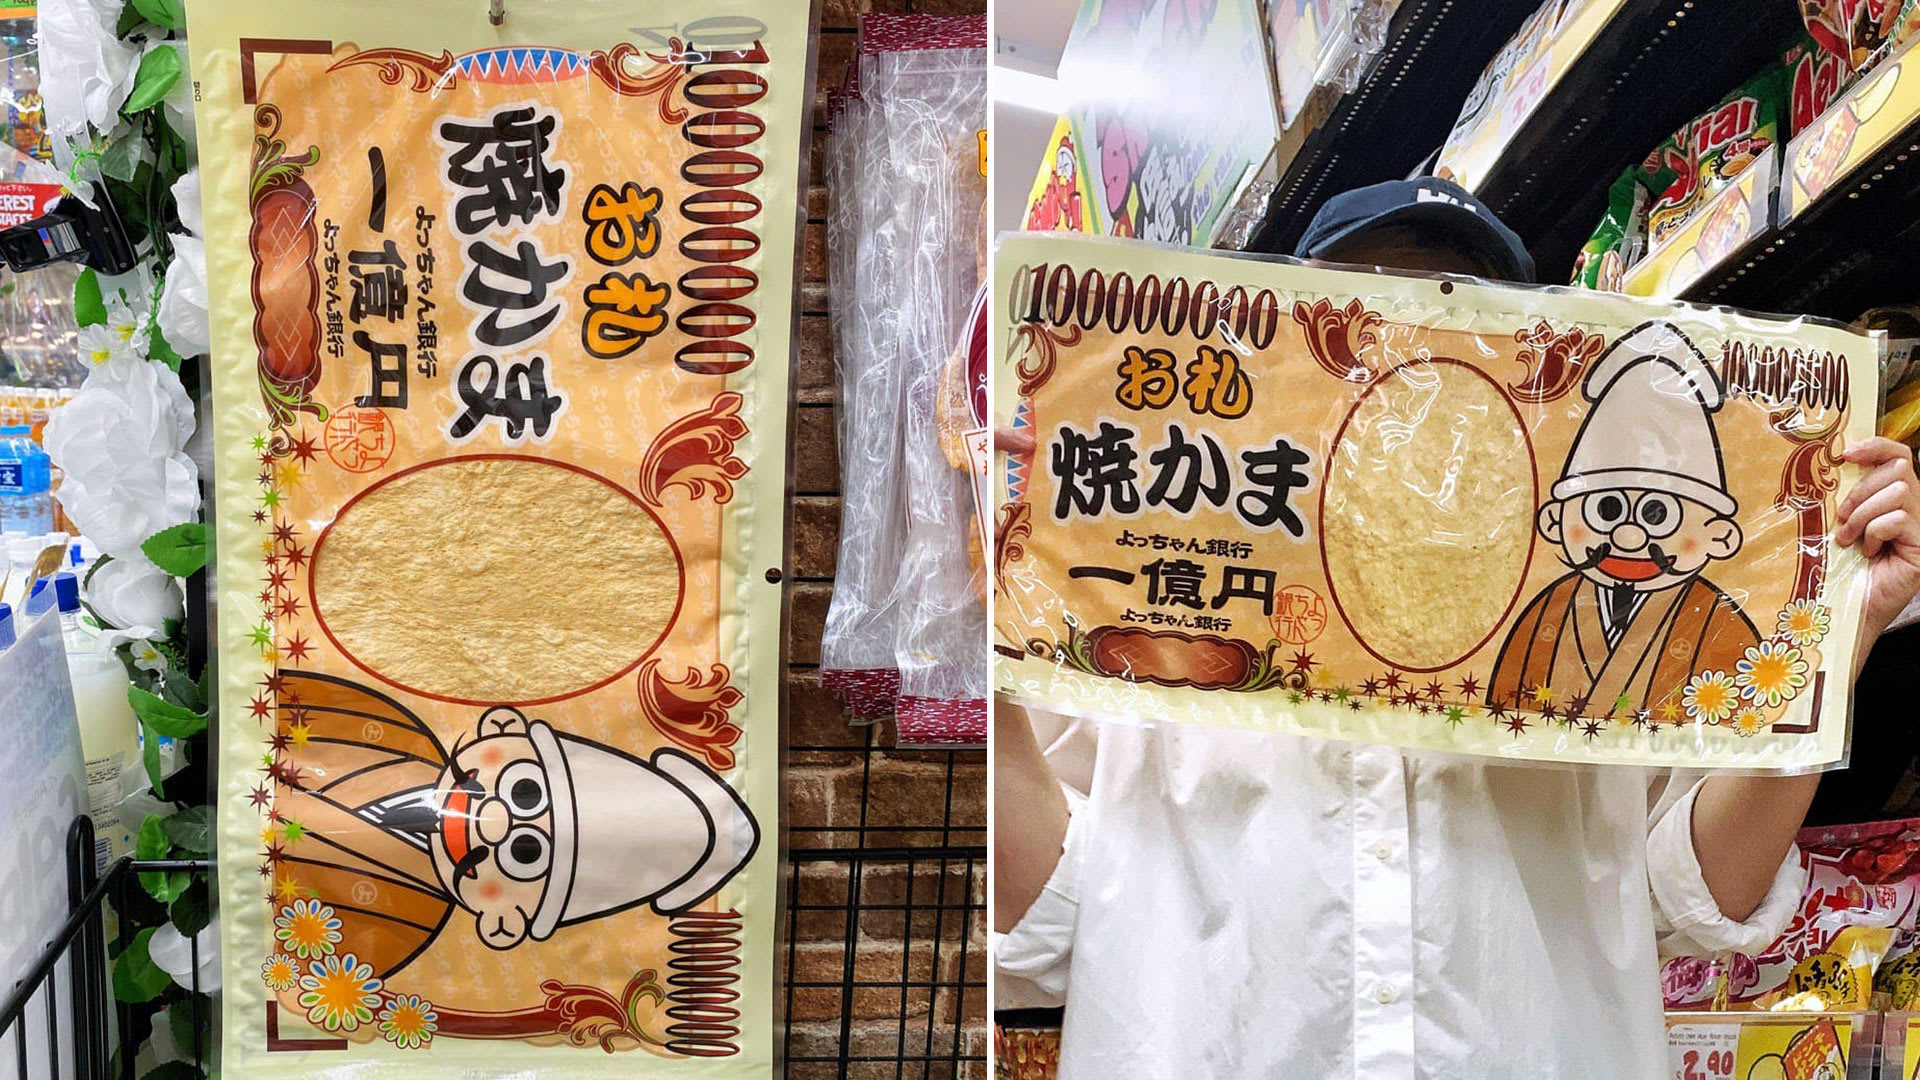 You Can Now Buy A Giant 100 Million Yen ‘Banknote’ Made Of Grilled Squid